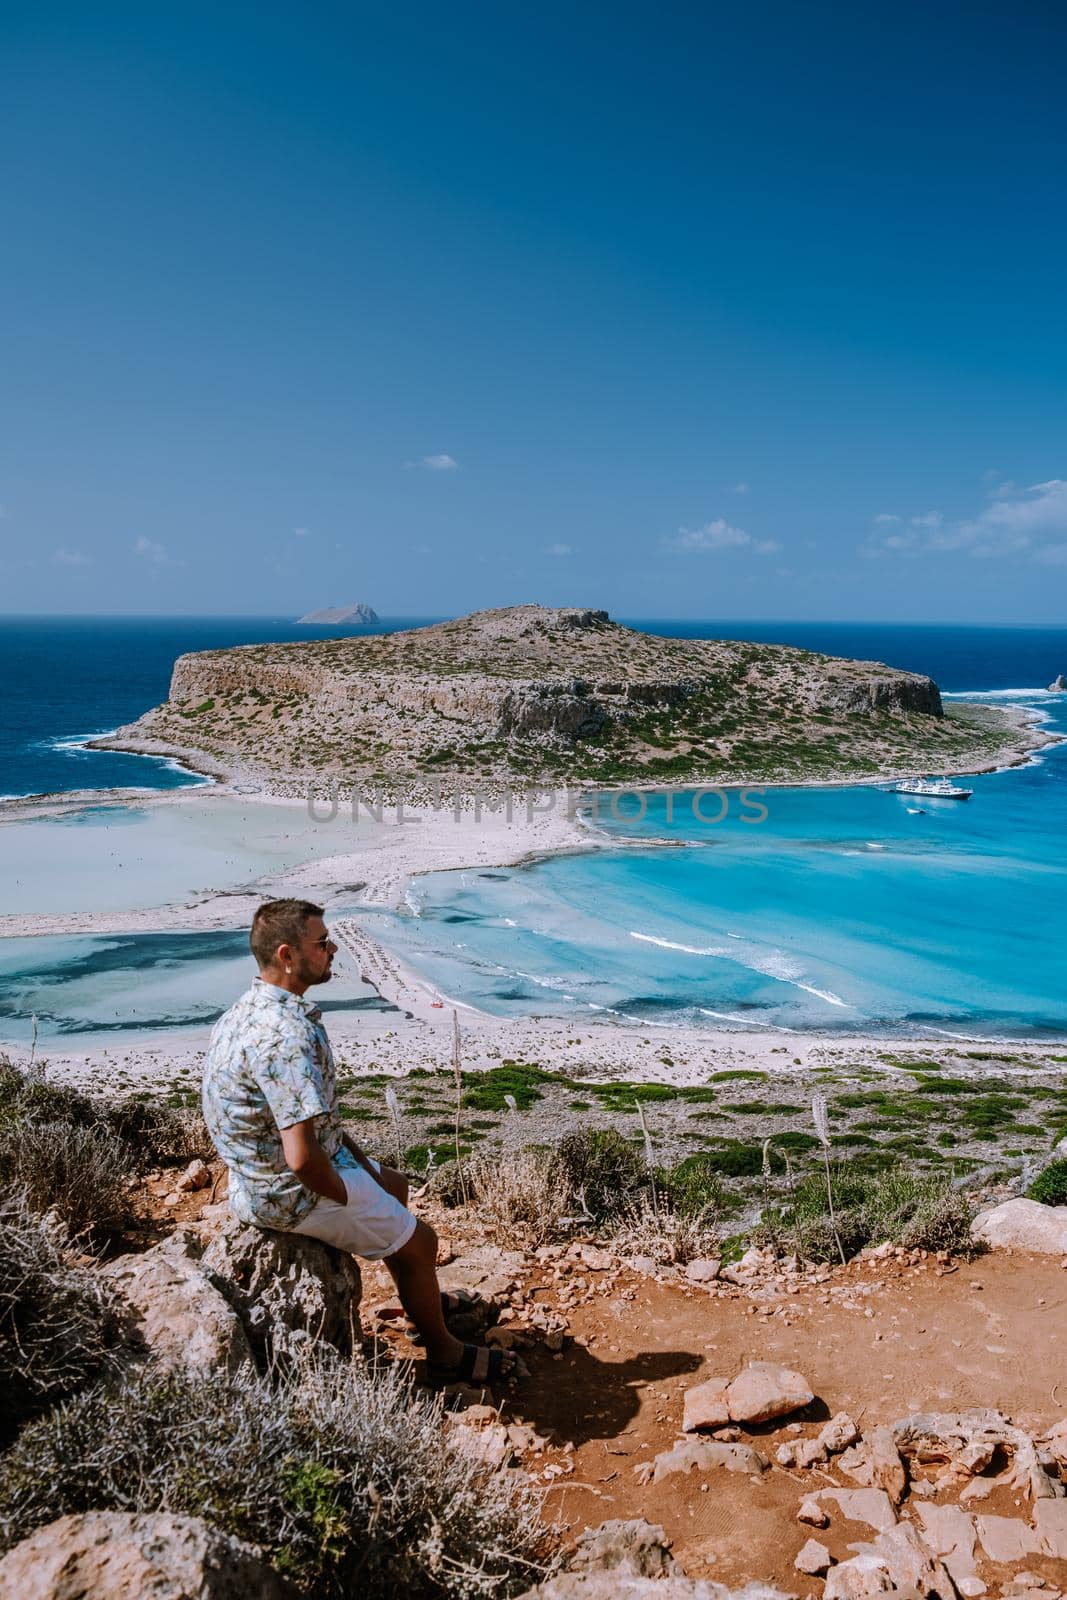 Balos Beach Cret Greece, Balos beach is on of the most beautiful beaches in Greece at the Greek Island young guy visit the beach during vacation